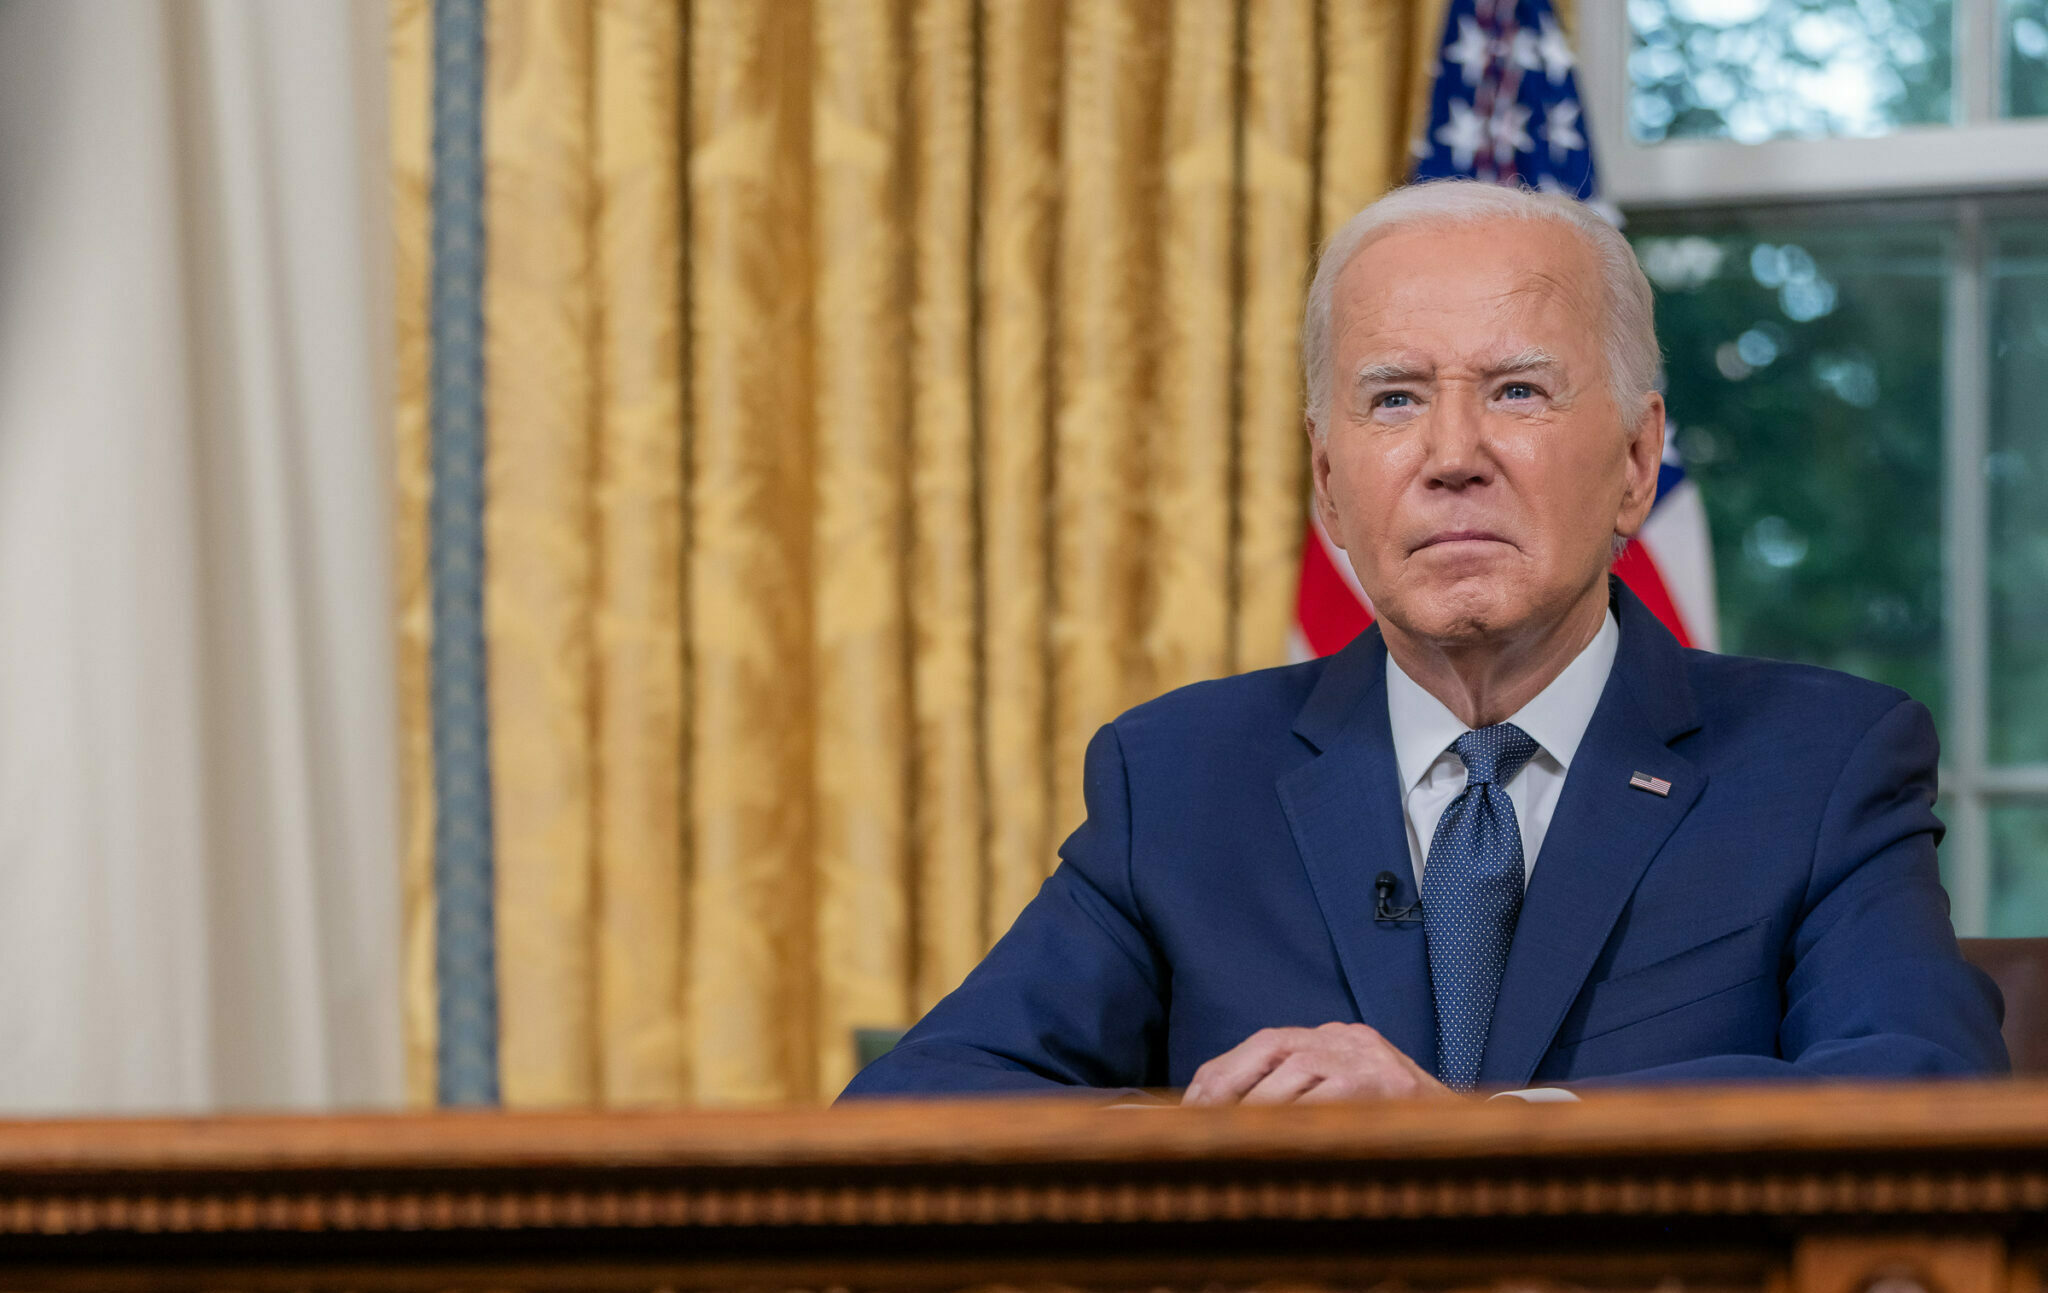 Thinking of a protest vote against Biden? New York may not be as blue as you think